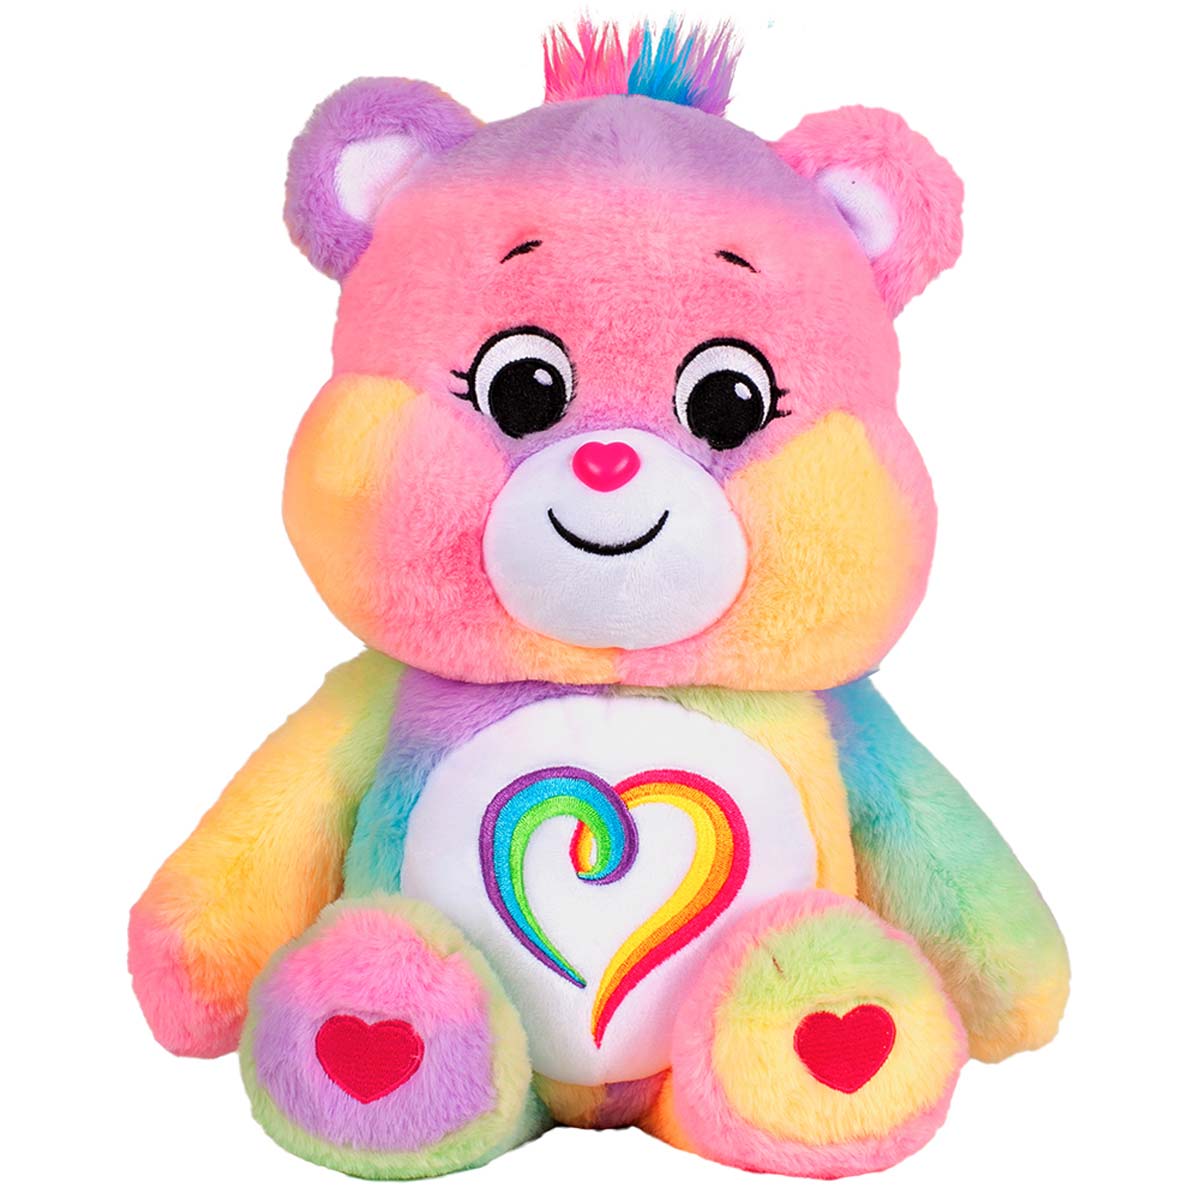 Care Bears Medium Plush Toy 14" Toy - Togetherness Bear, none